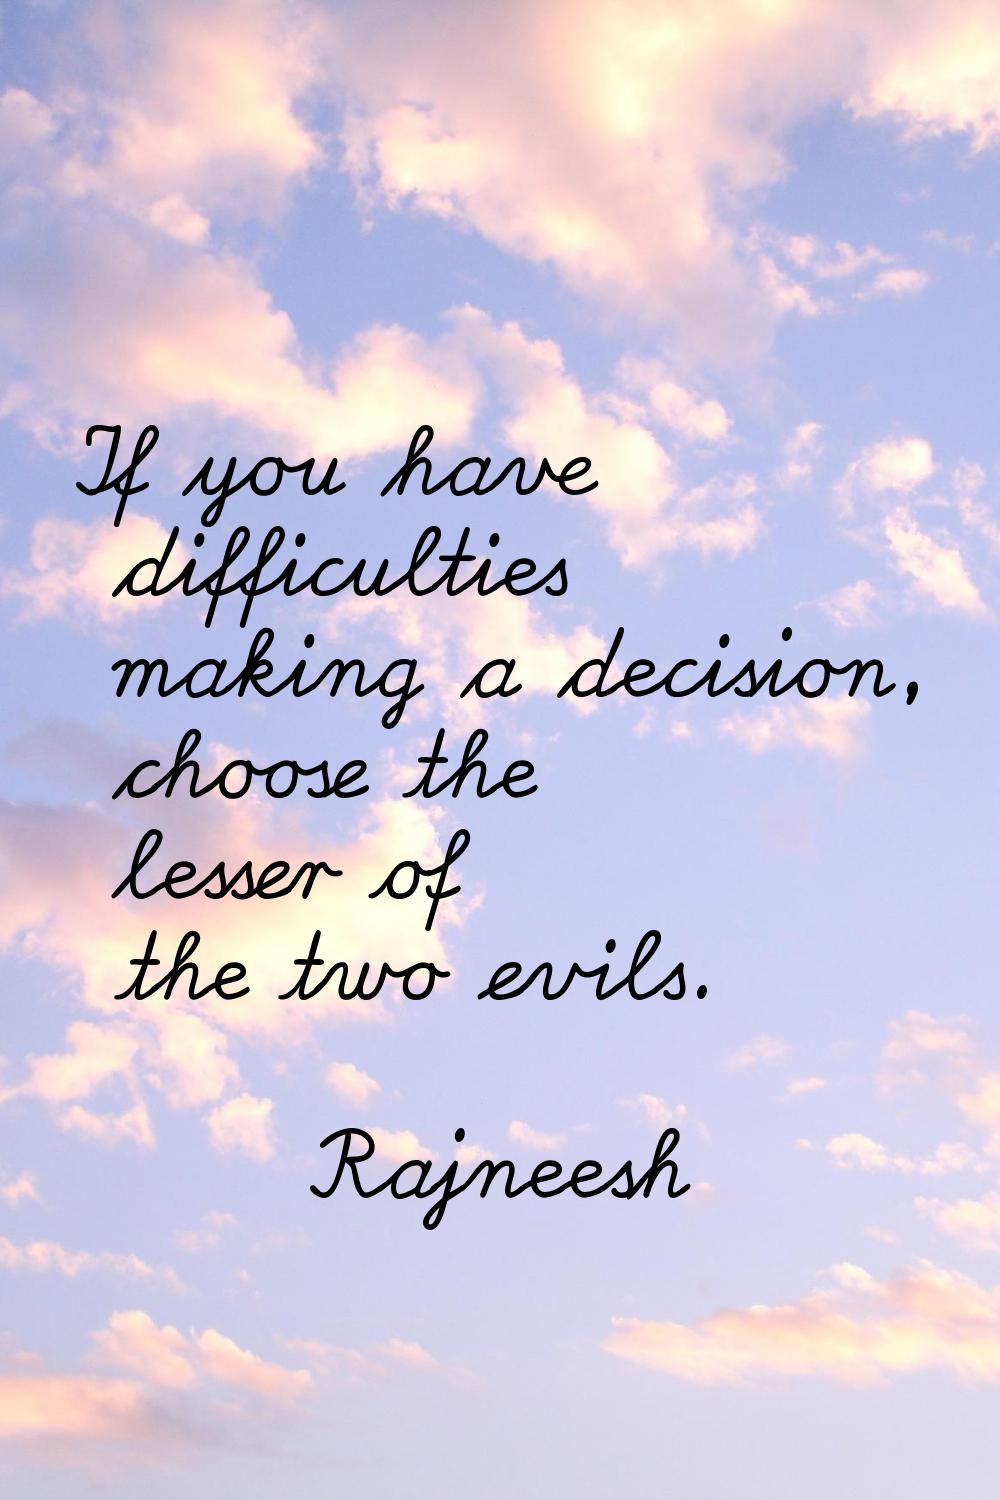 If you have difficulties making a decision, choose the lesser of the two evils.